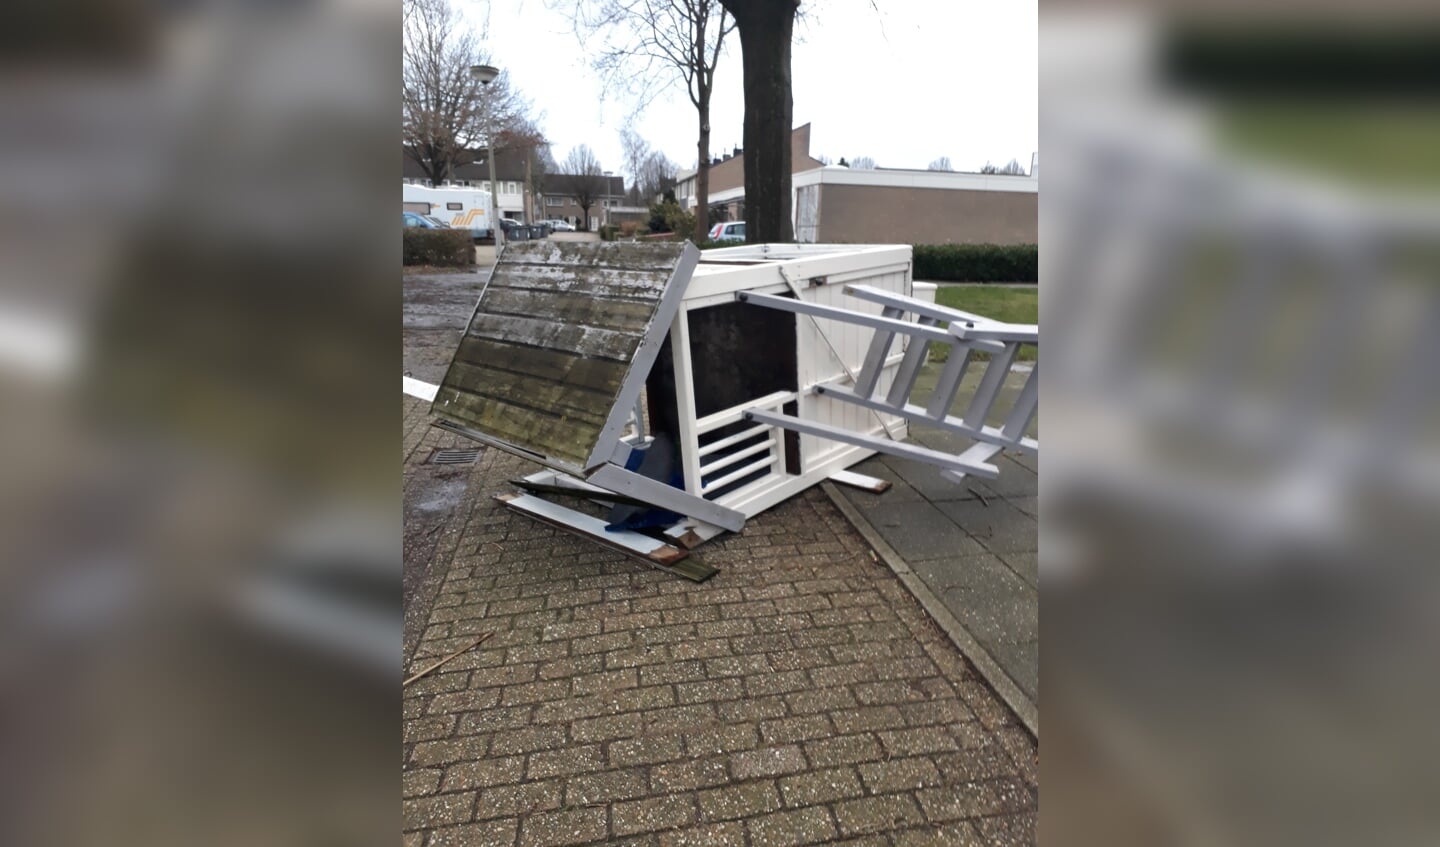 Stormschade in Oss. (Foto: Nathalie Duisters)